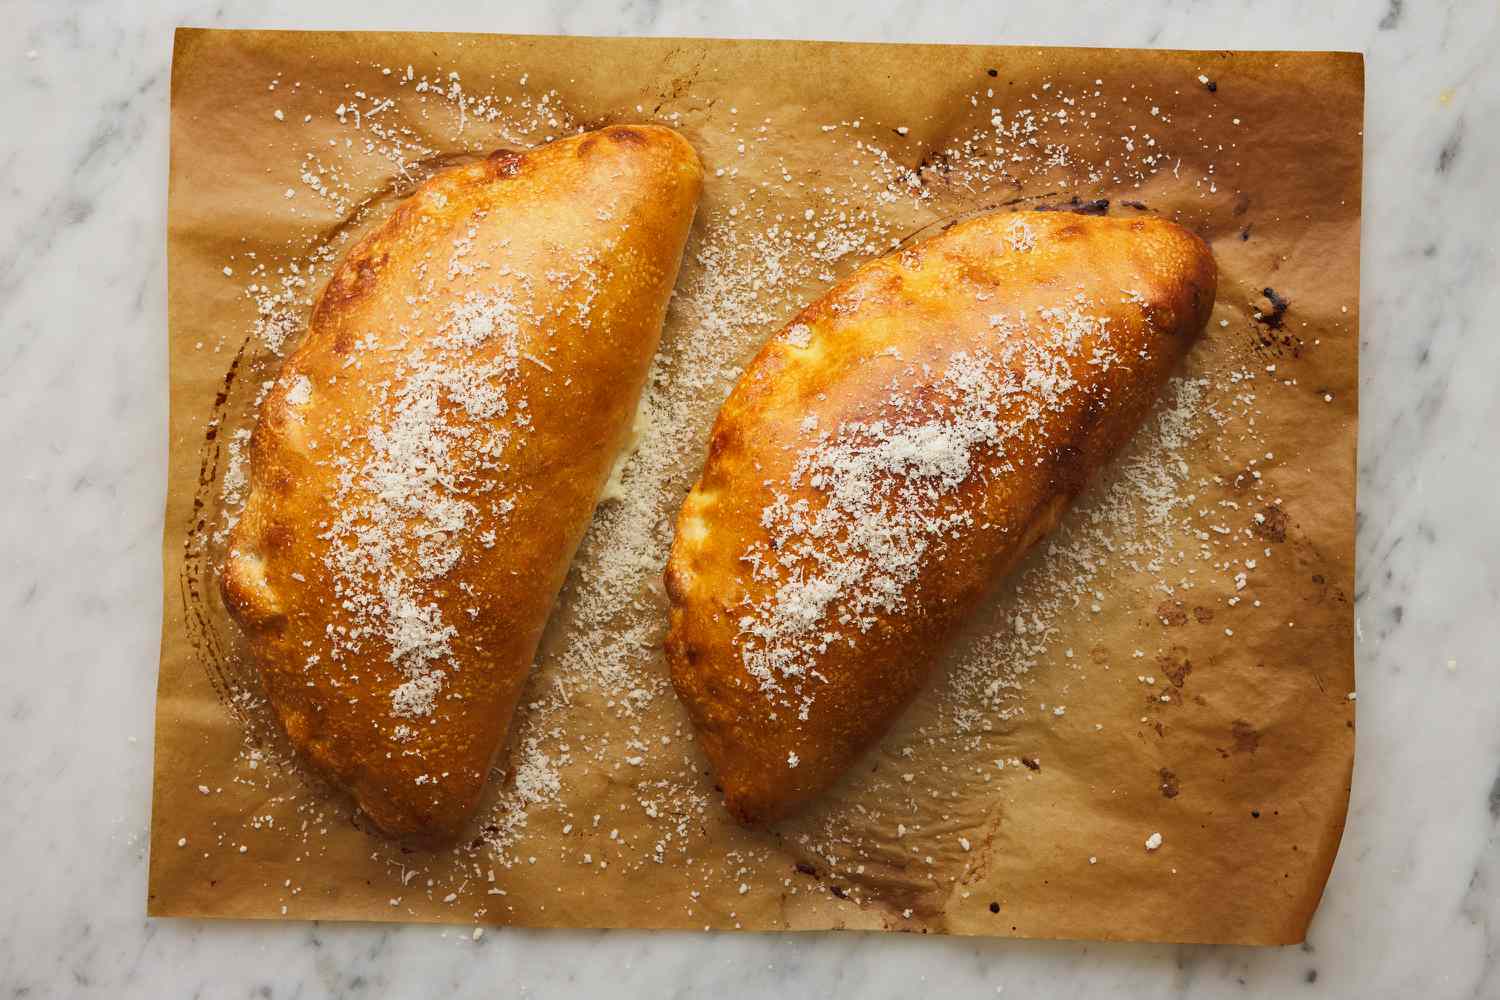 browned and baked calzones dusted with cheese